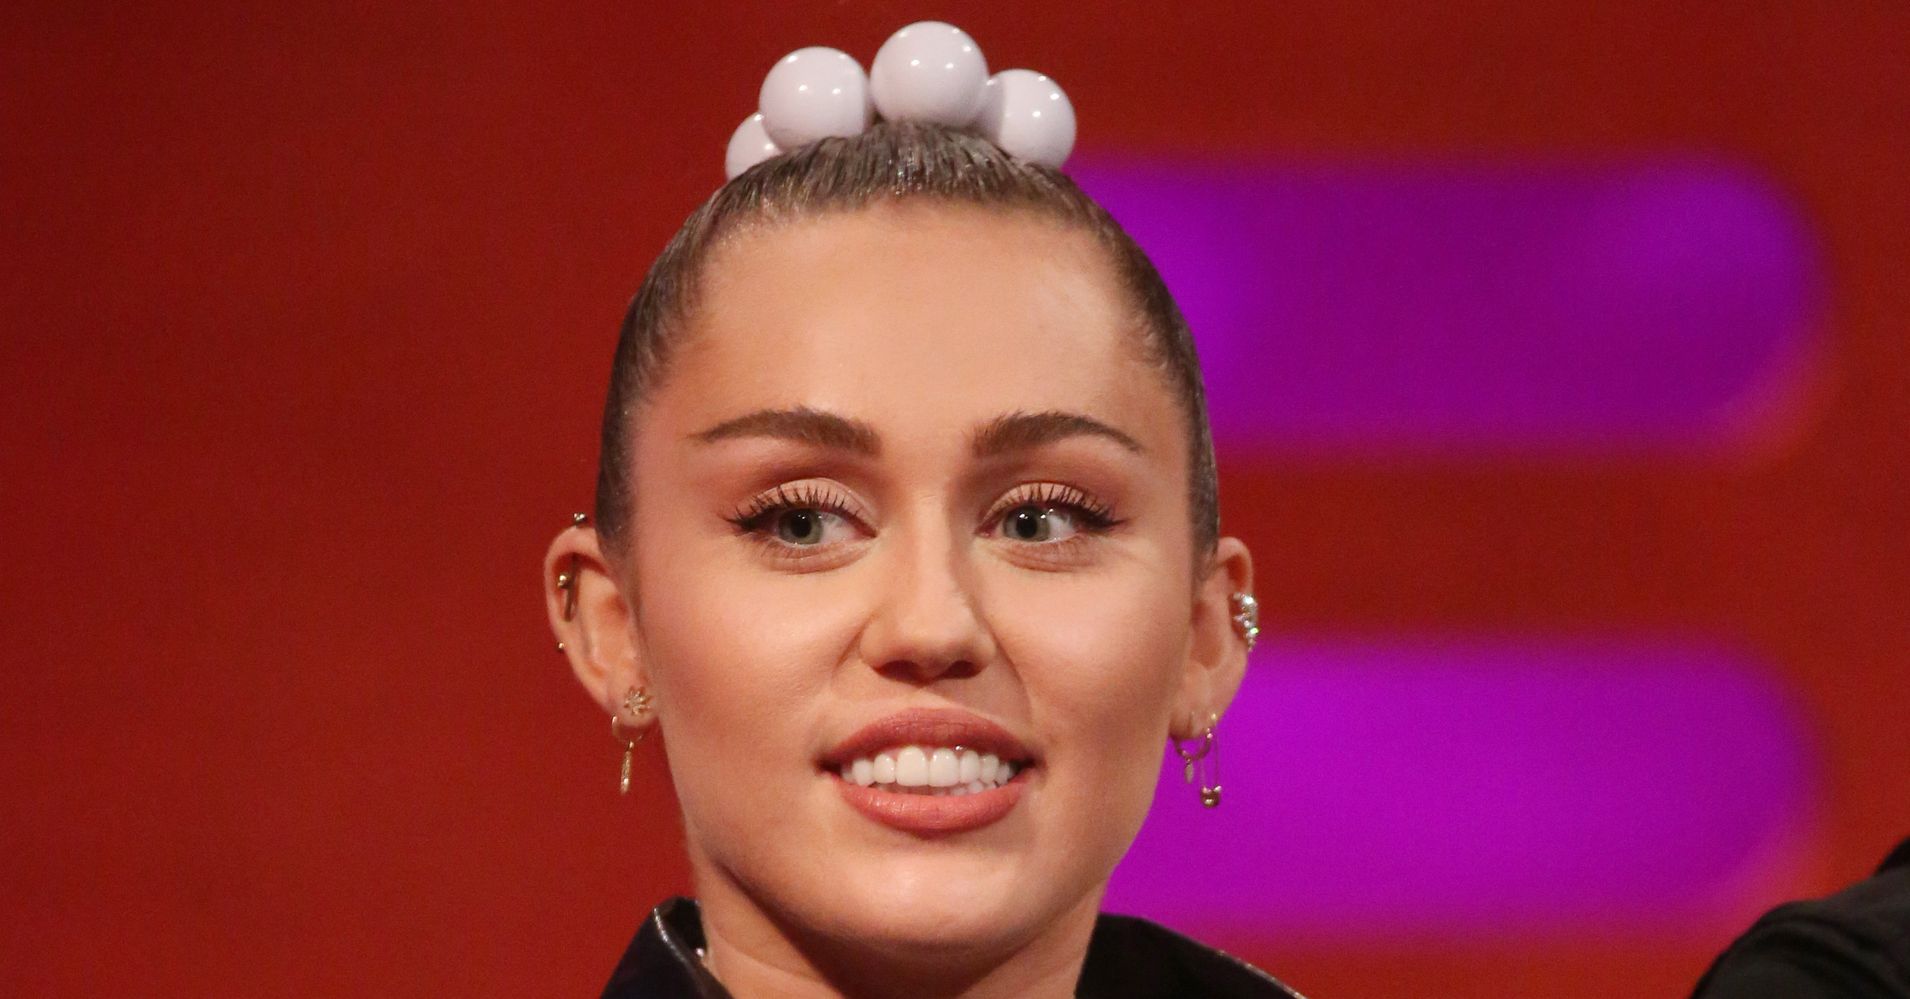 Miley Cyrus Shuts Down Pregnancy Rumors With Egg Cellent Response 5791